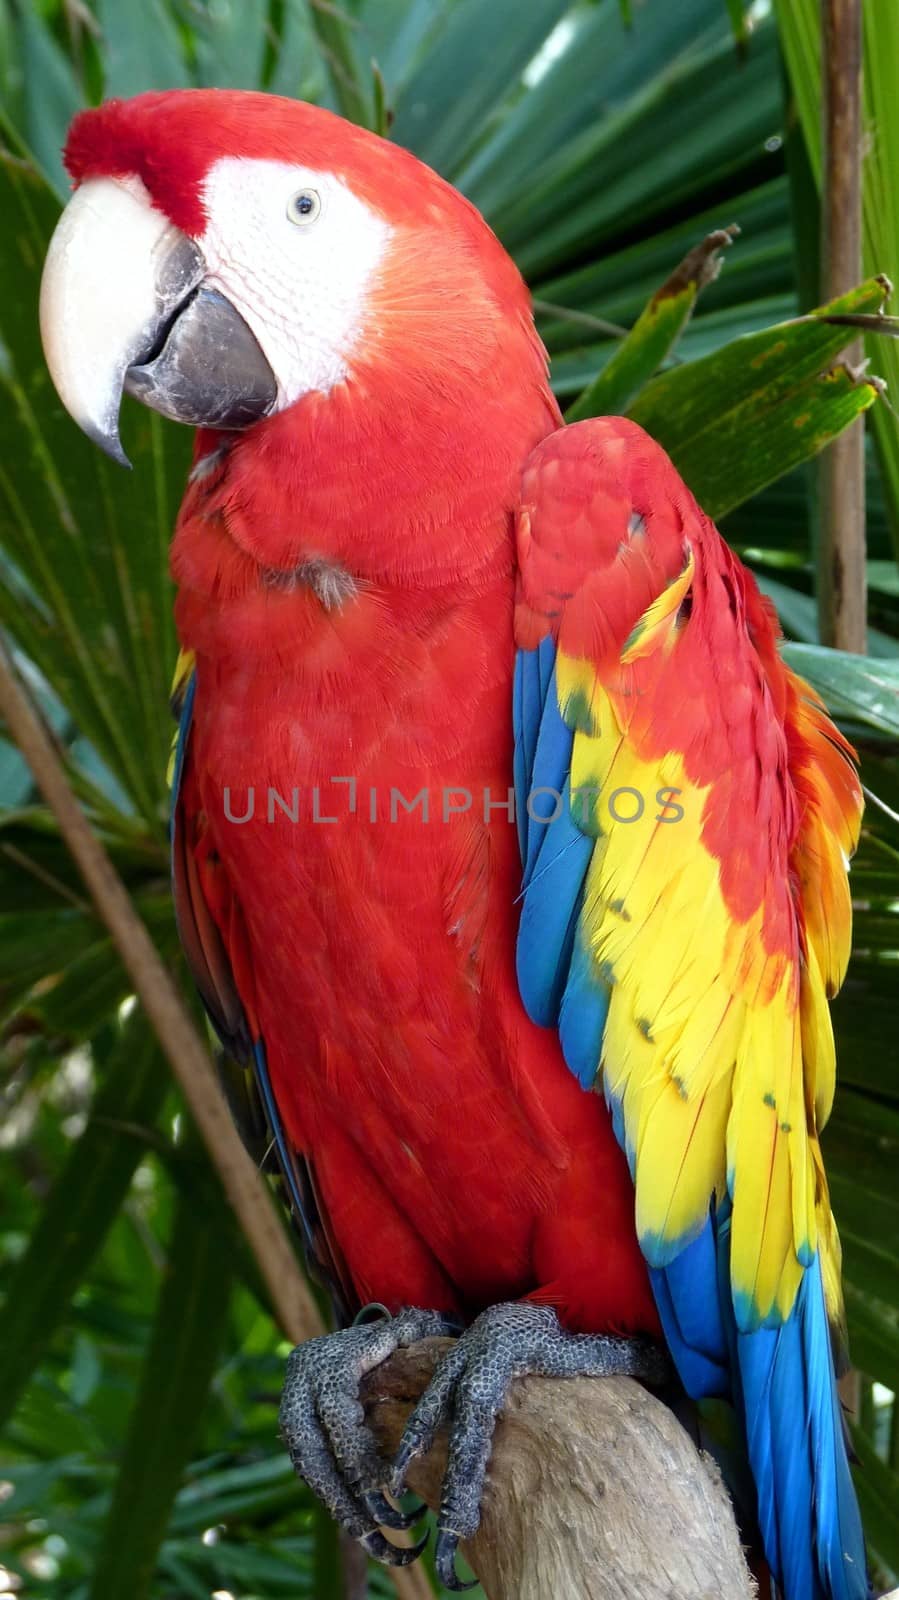 Colorful scarlet macaw perched on a branch, Mexico